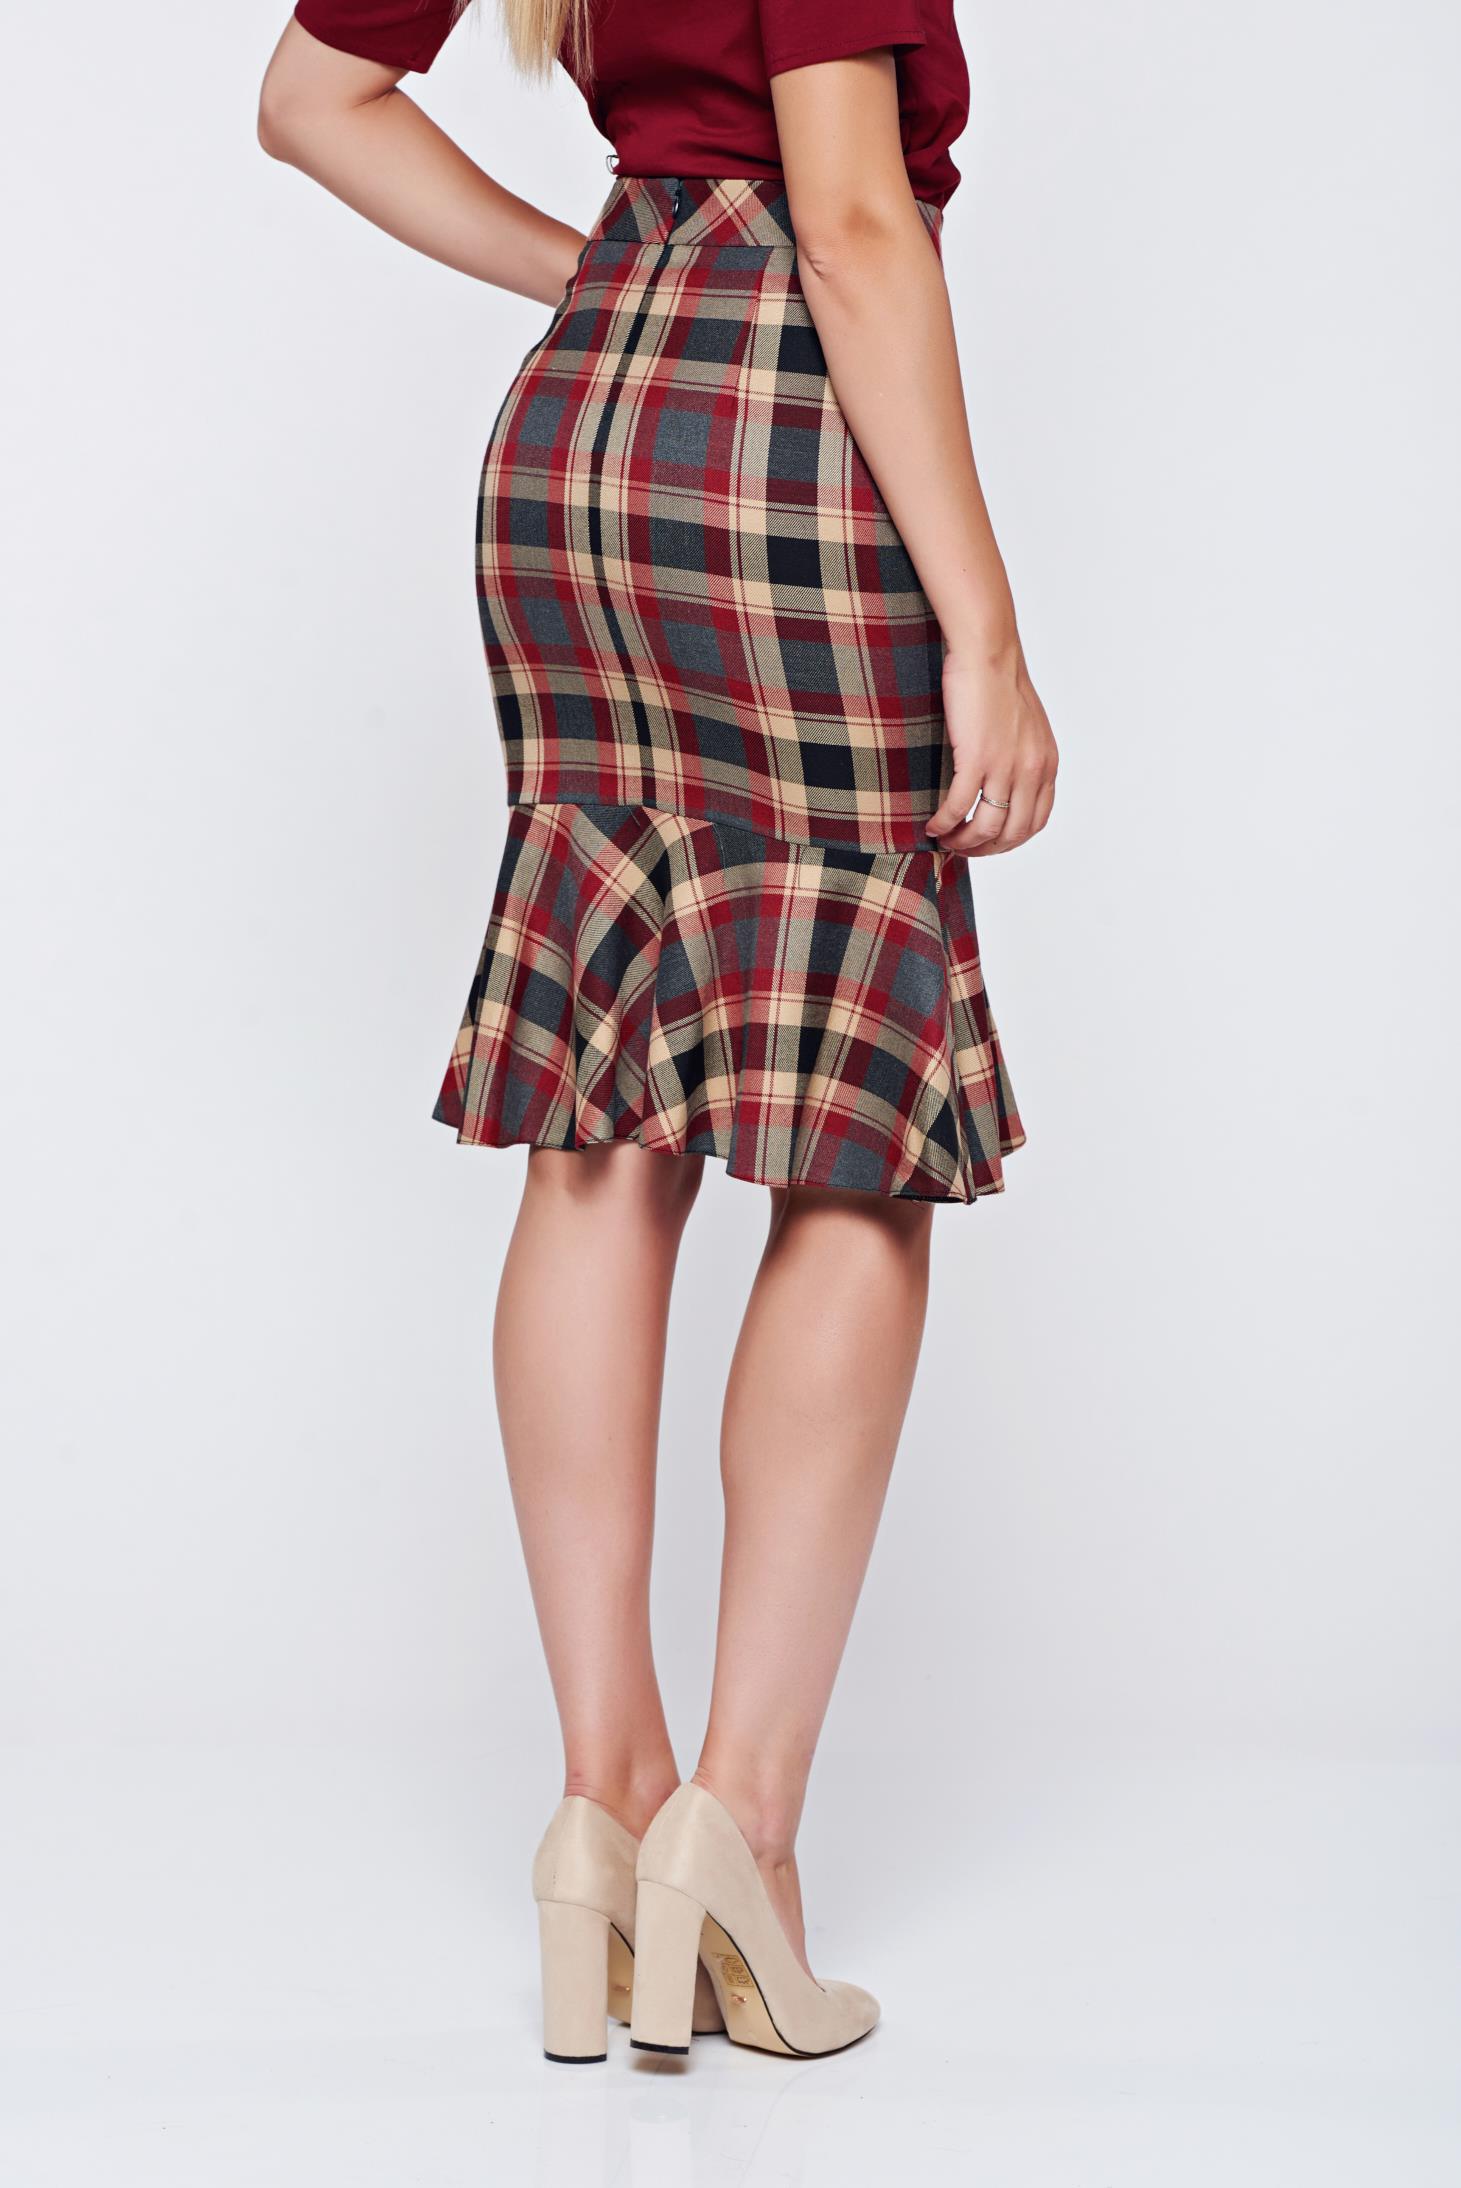 LaDonna office pencil plaid fabric with ruffle details red skirt 2 - StarShinerS.com